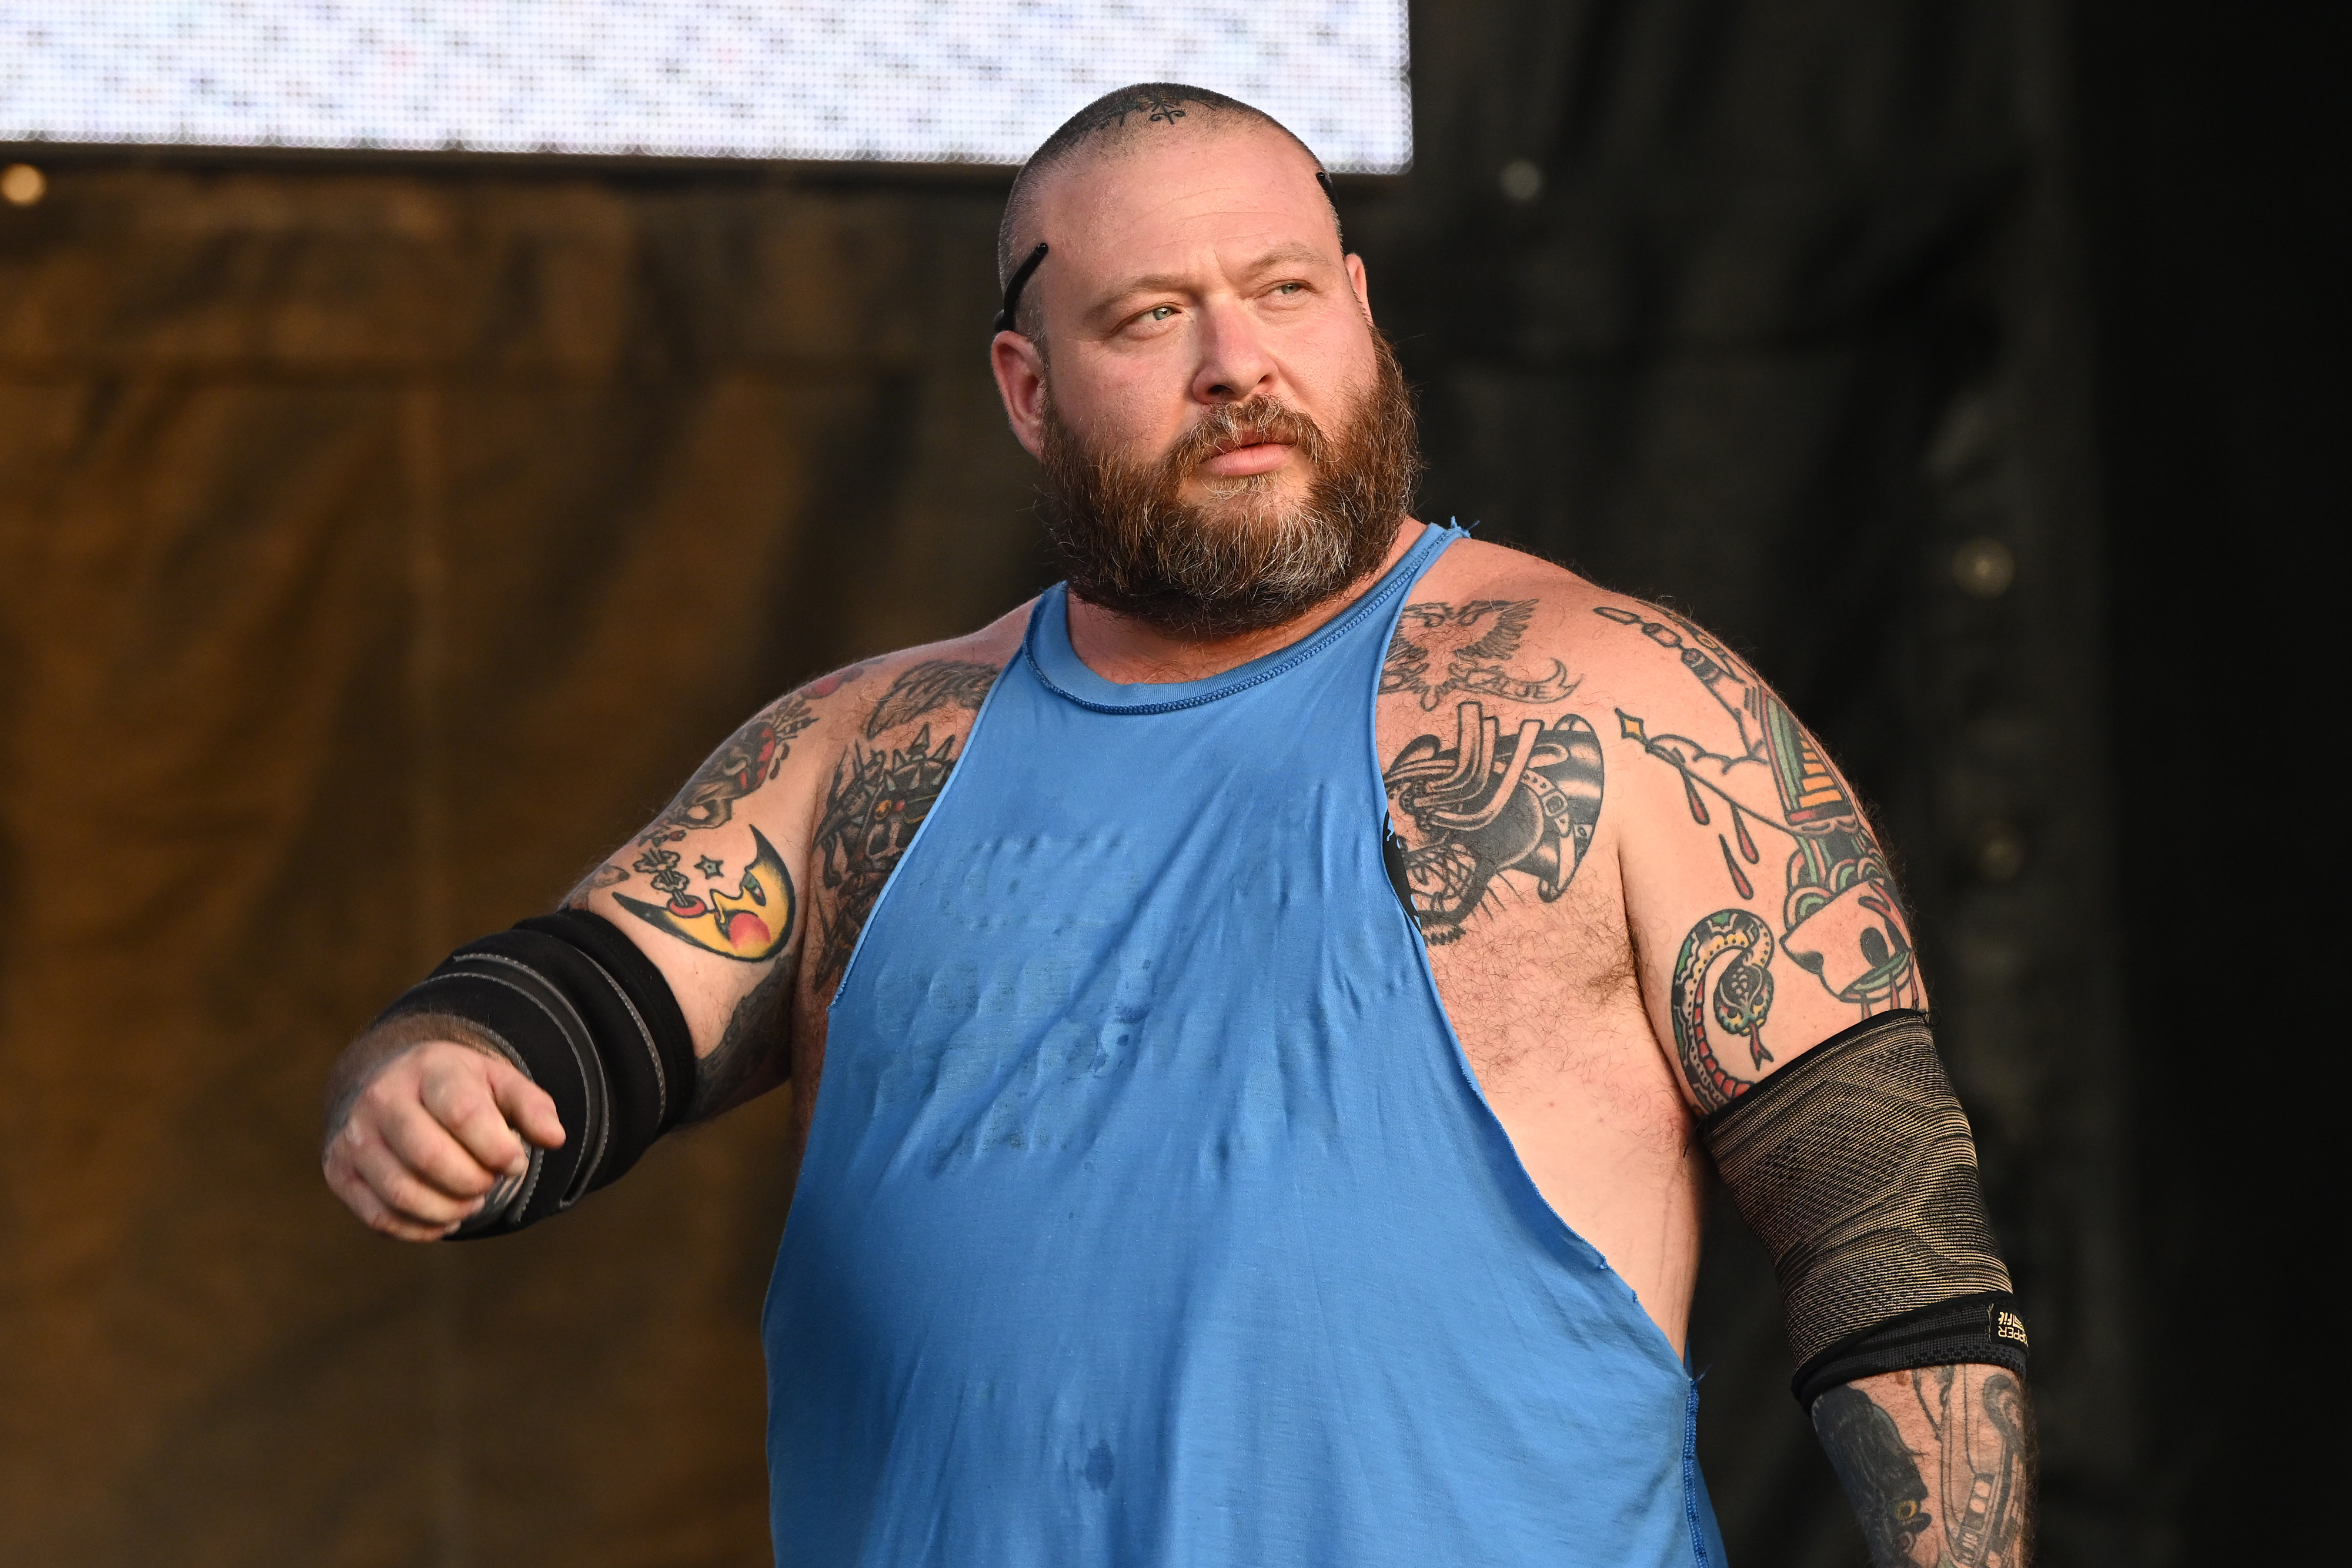 Action Bronson on stage at the Riot Fest 2022 in Chicago, Illinois. | Source: Getty Images